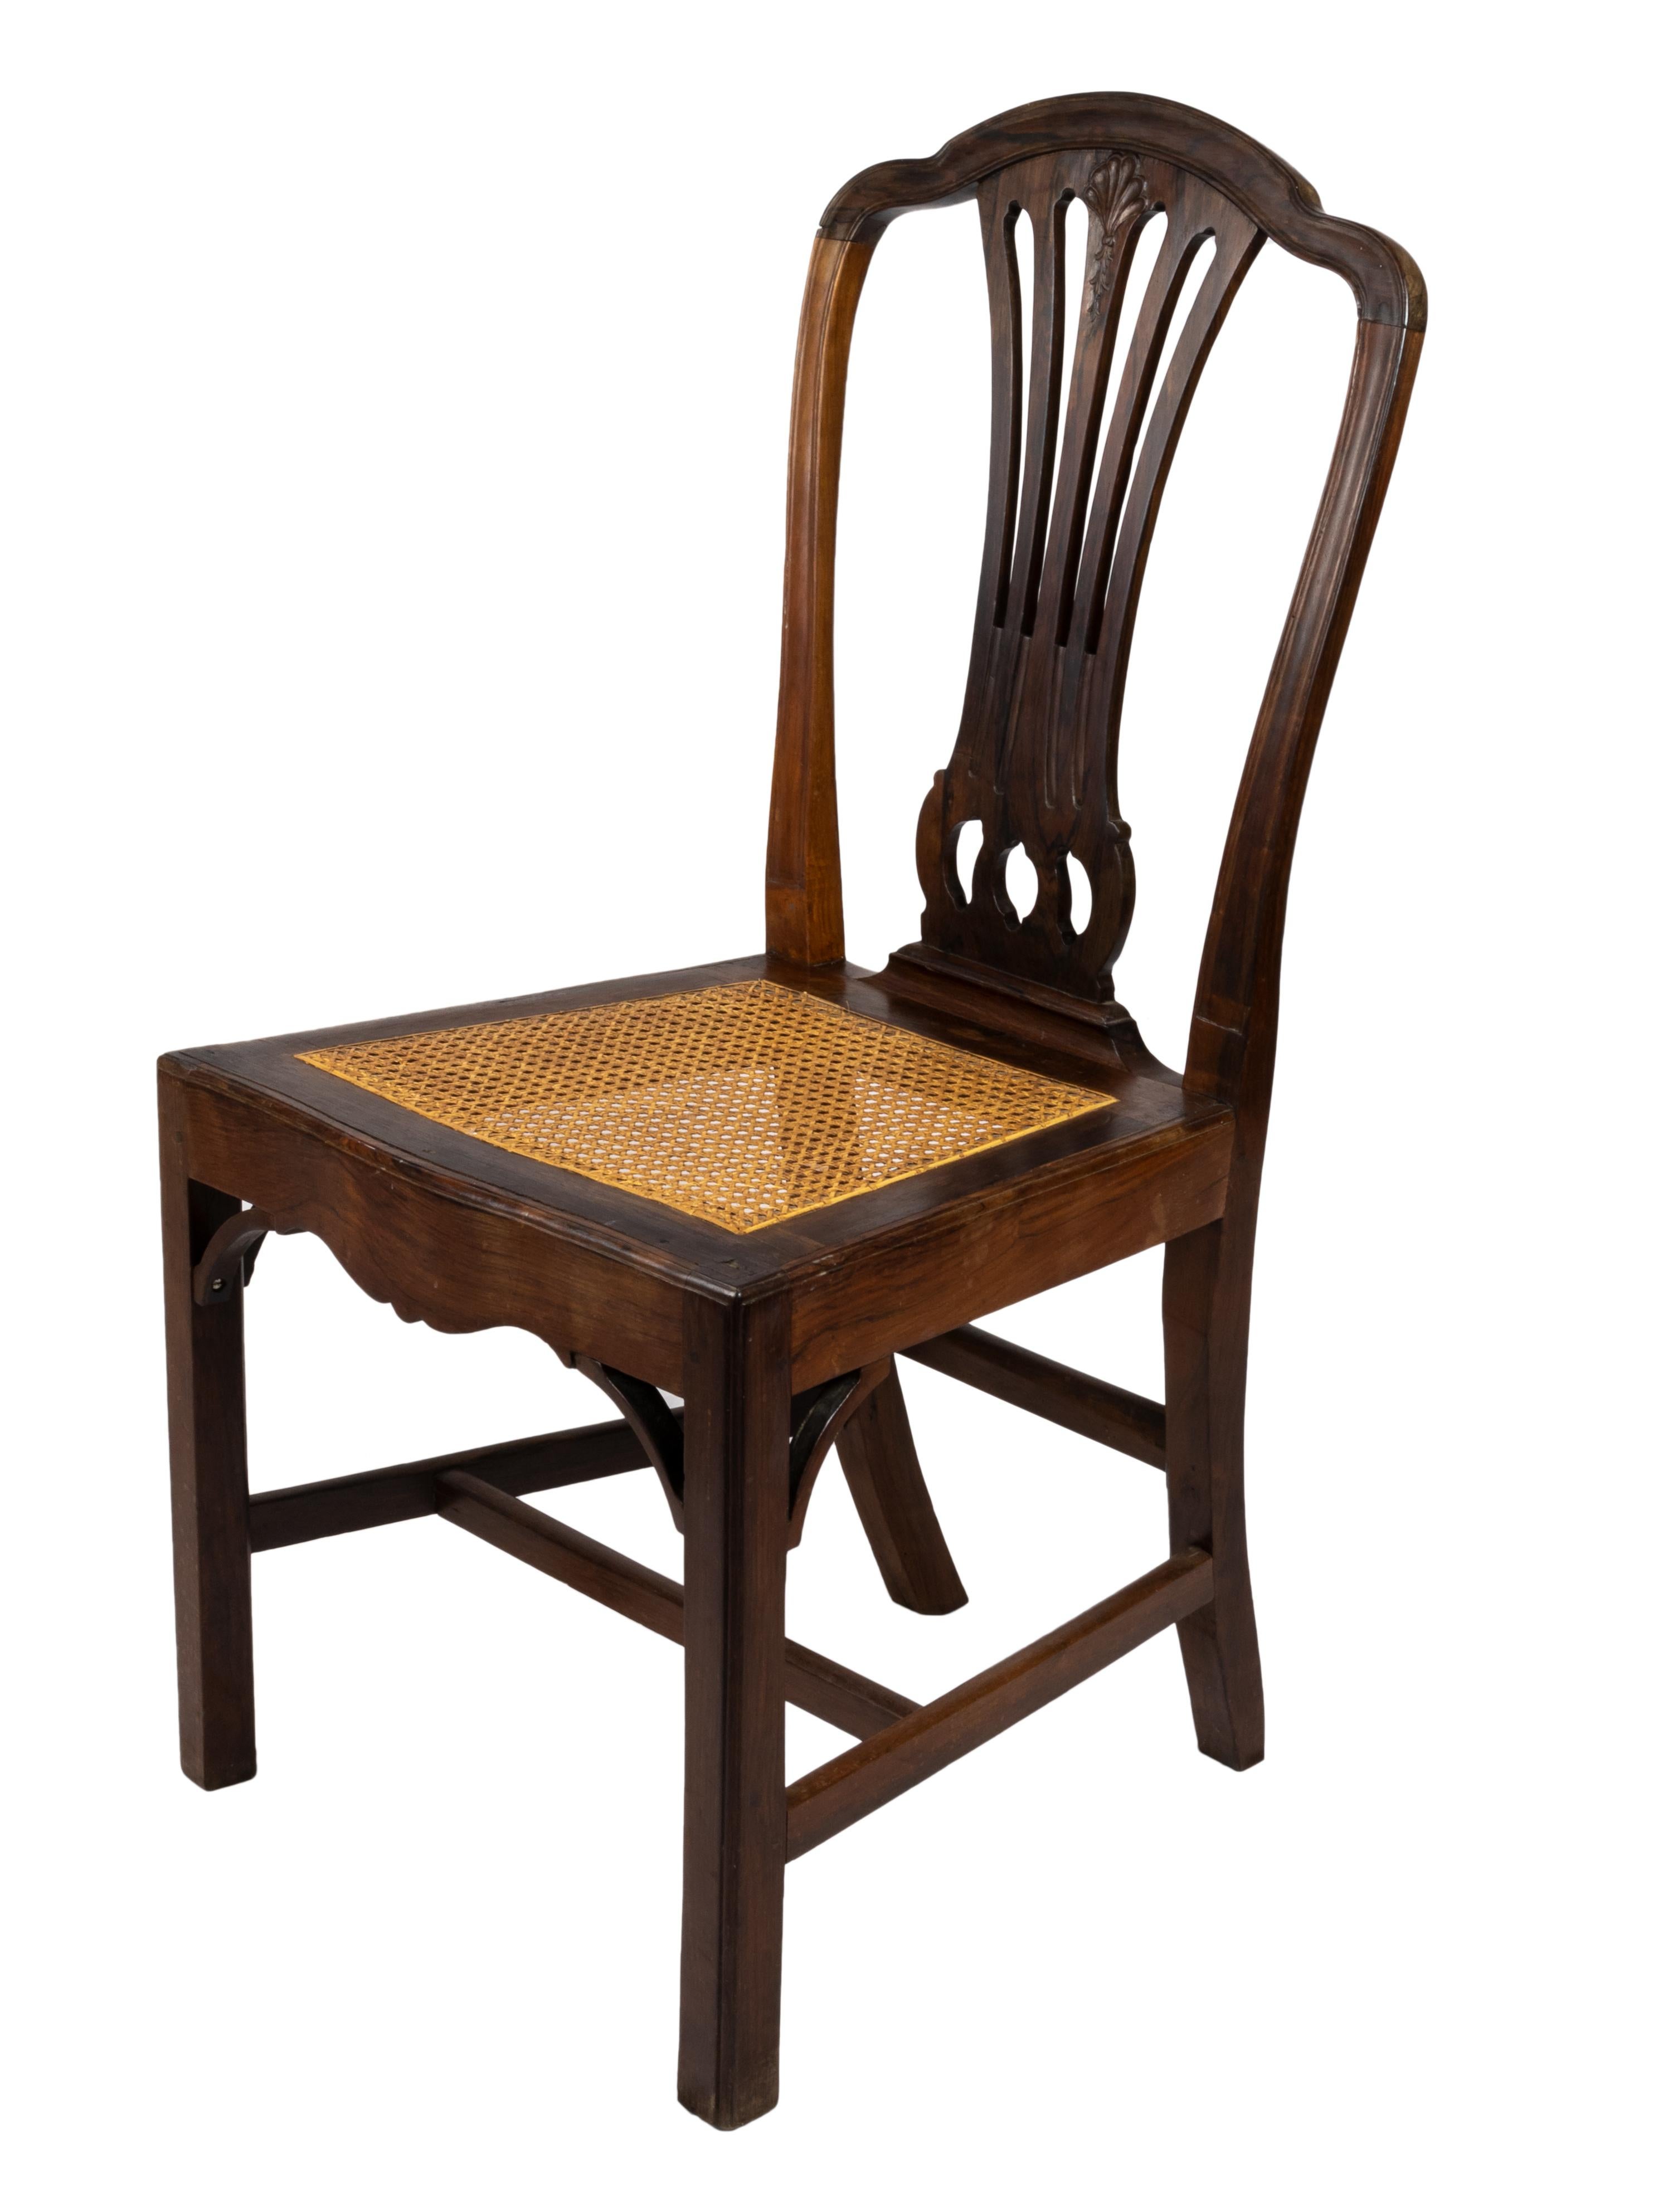 Hand-Crafted Chippendale Style Amphora Chair, 19th Century For Sale